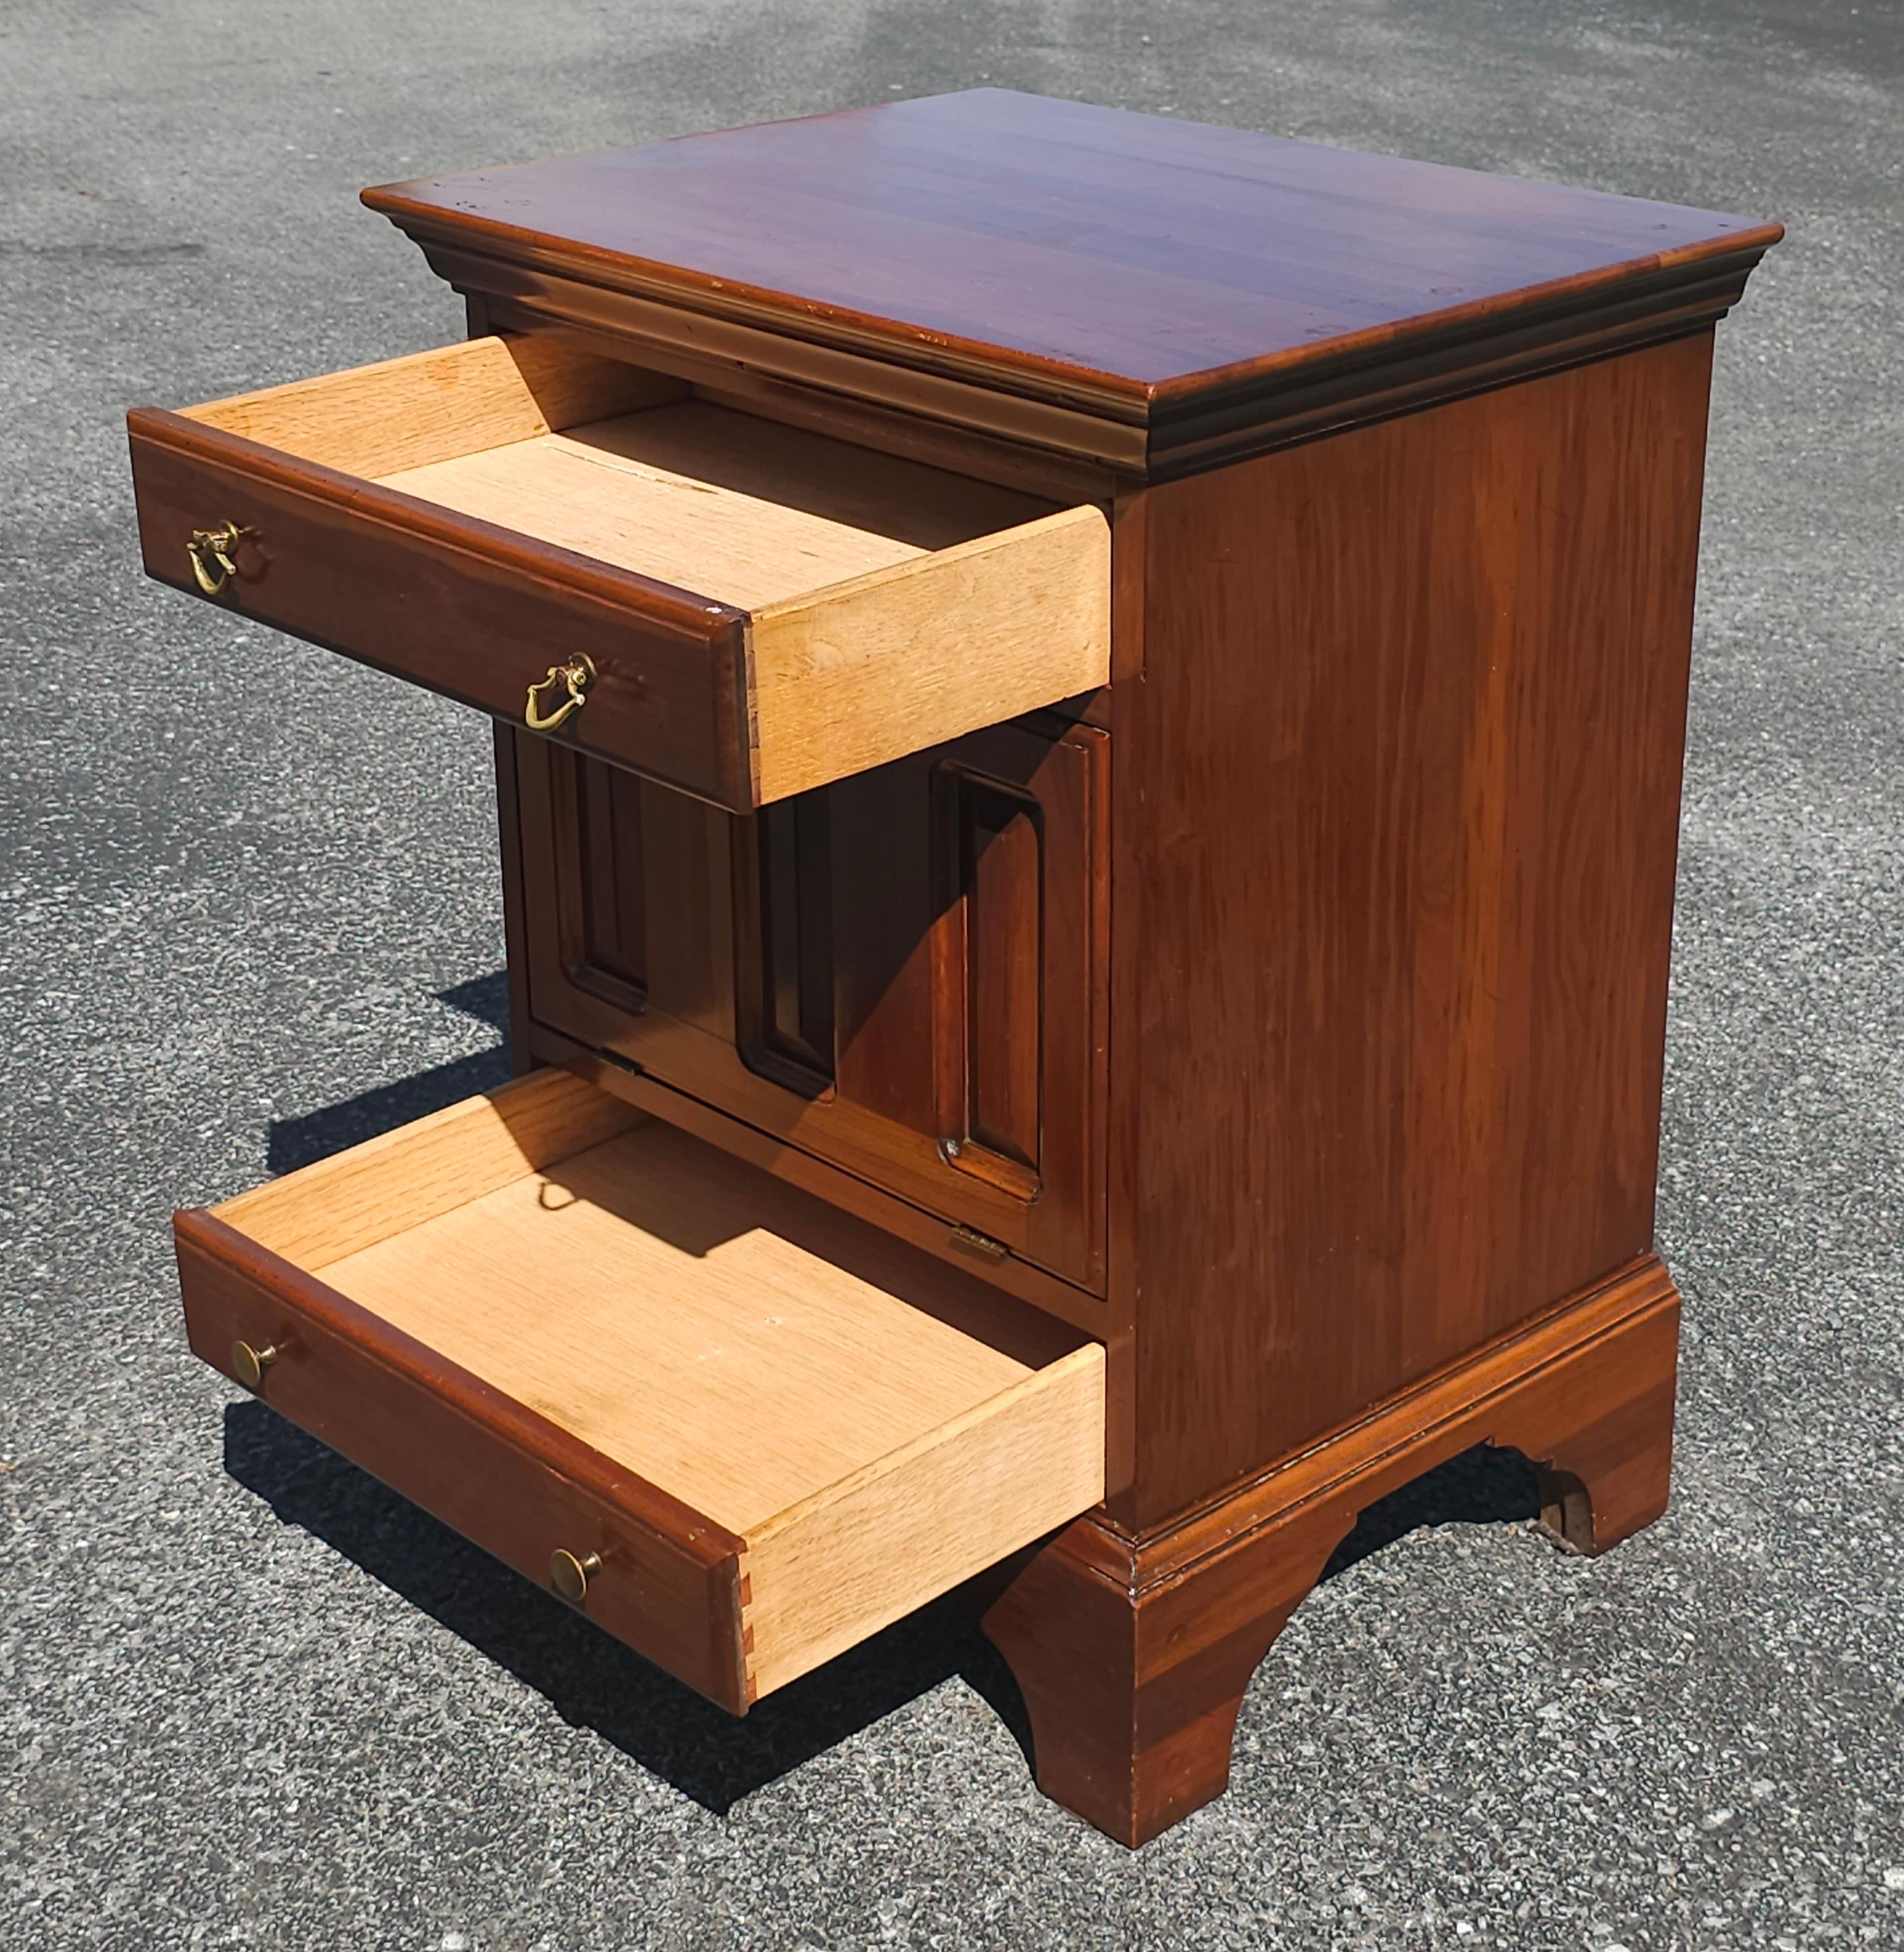 20th Century David Cabinet Cherry 2-Drawer a Abattant Door Bedside Cabinets Pair For Sale 5